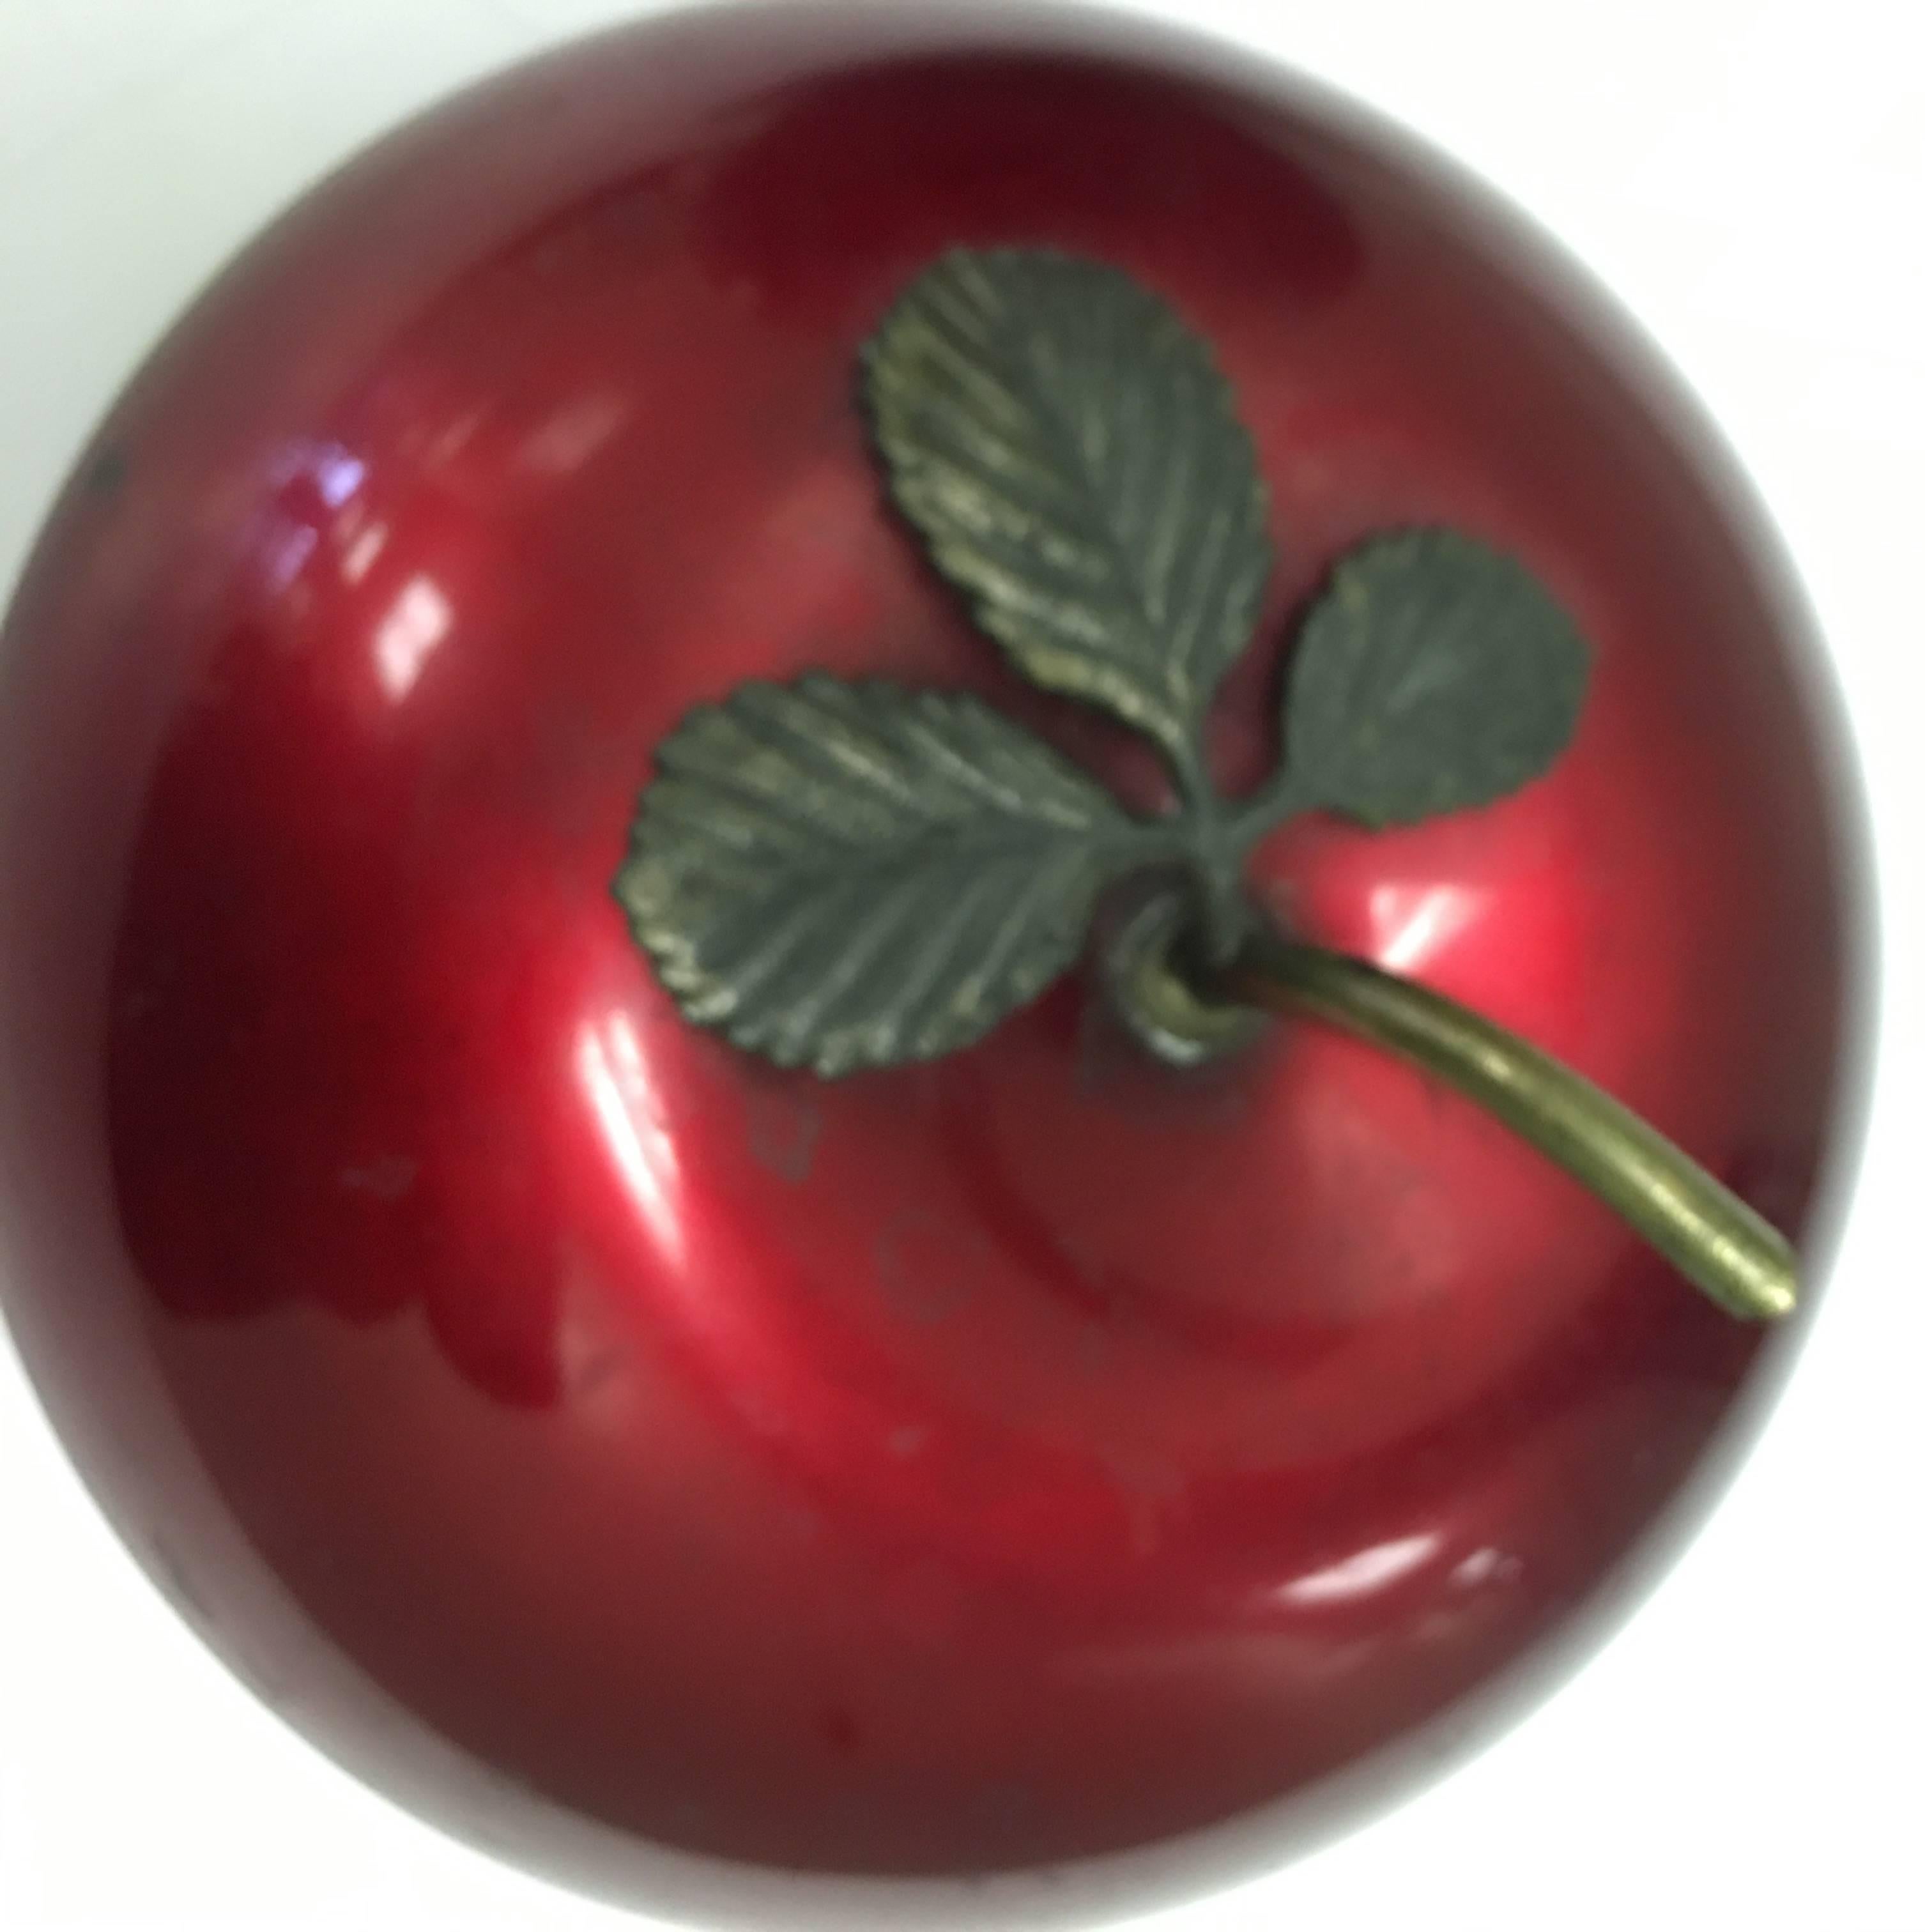 Mid-Century Modern red apple form ice bucket with a brass stem lid handle by Apollo Studios, New York.